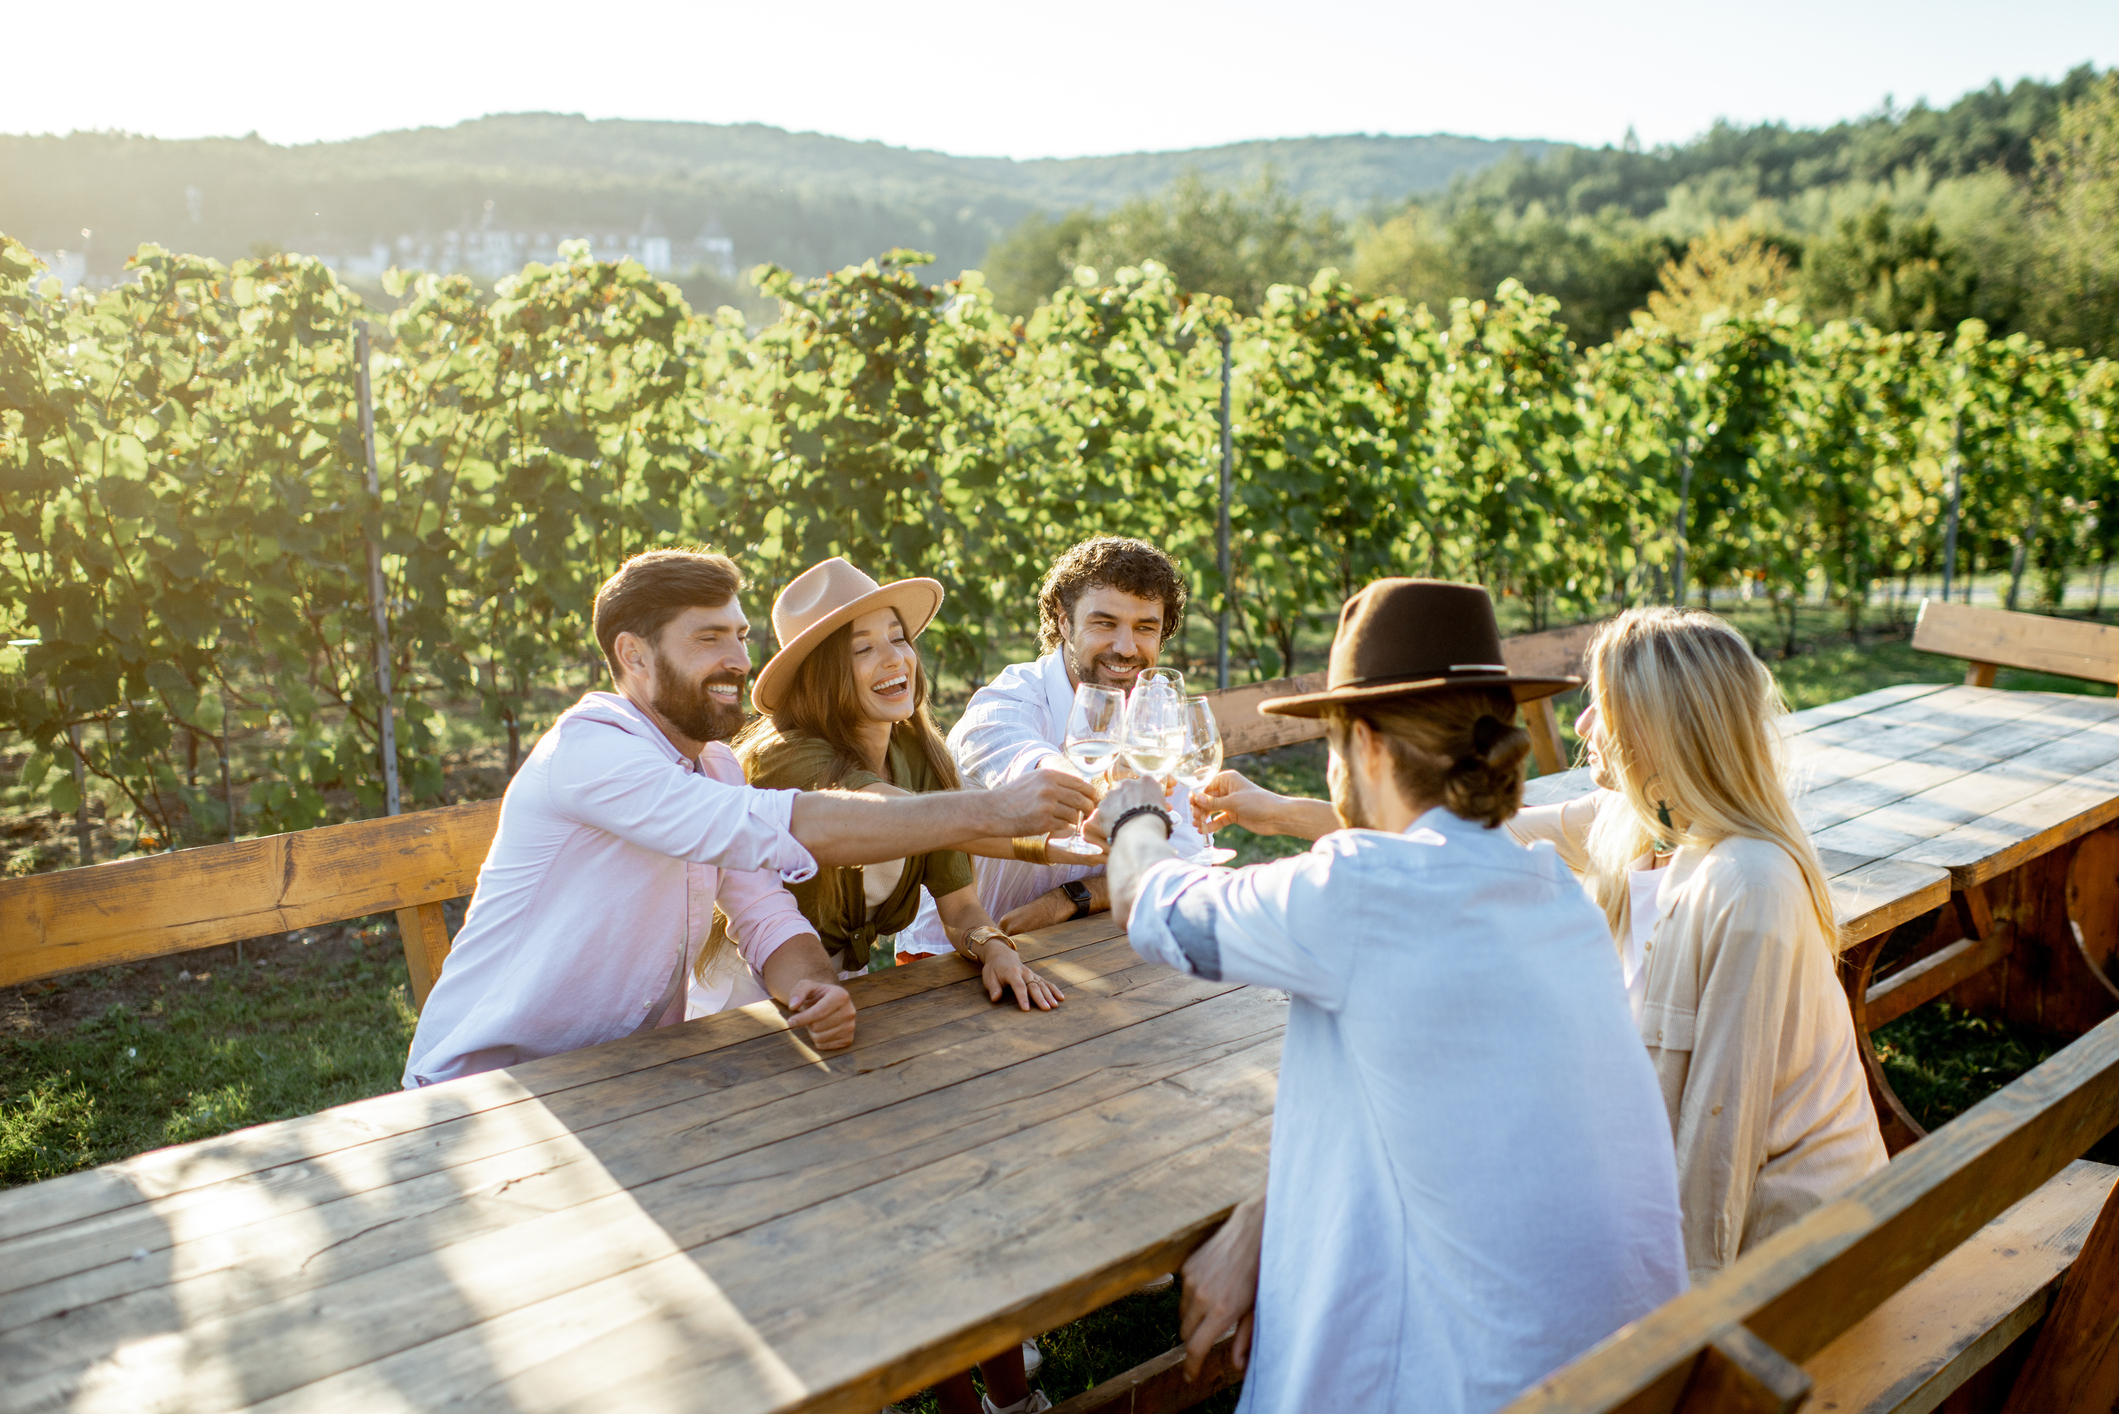 Group of friends toast in a winery